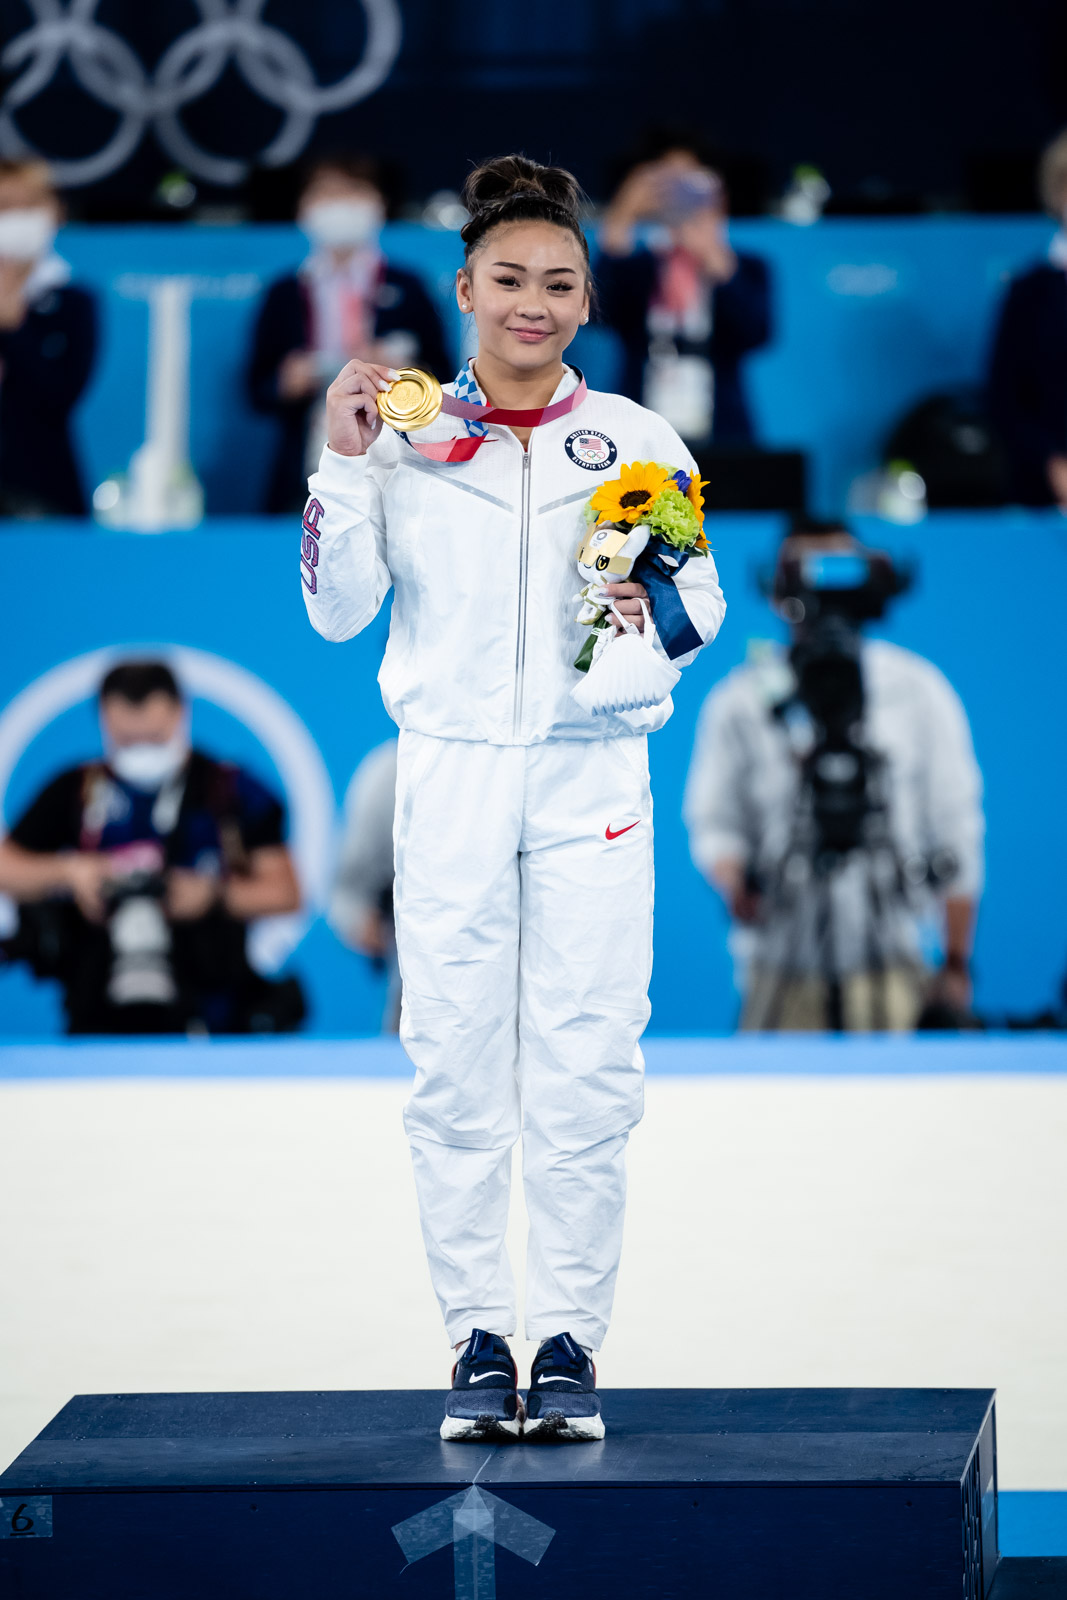 GOLD! Sunisa Lee wins the all-around title at the Tokyo Olympics